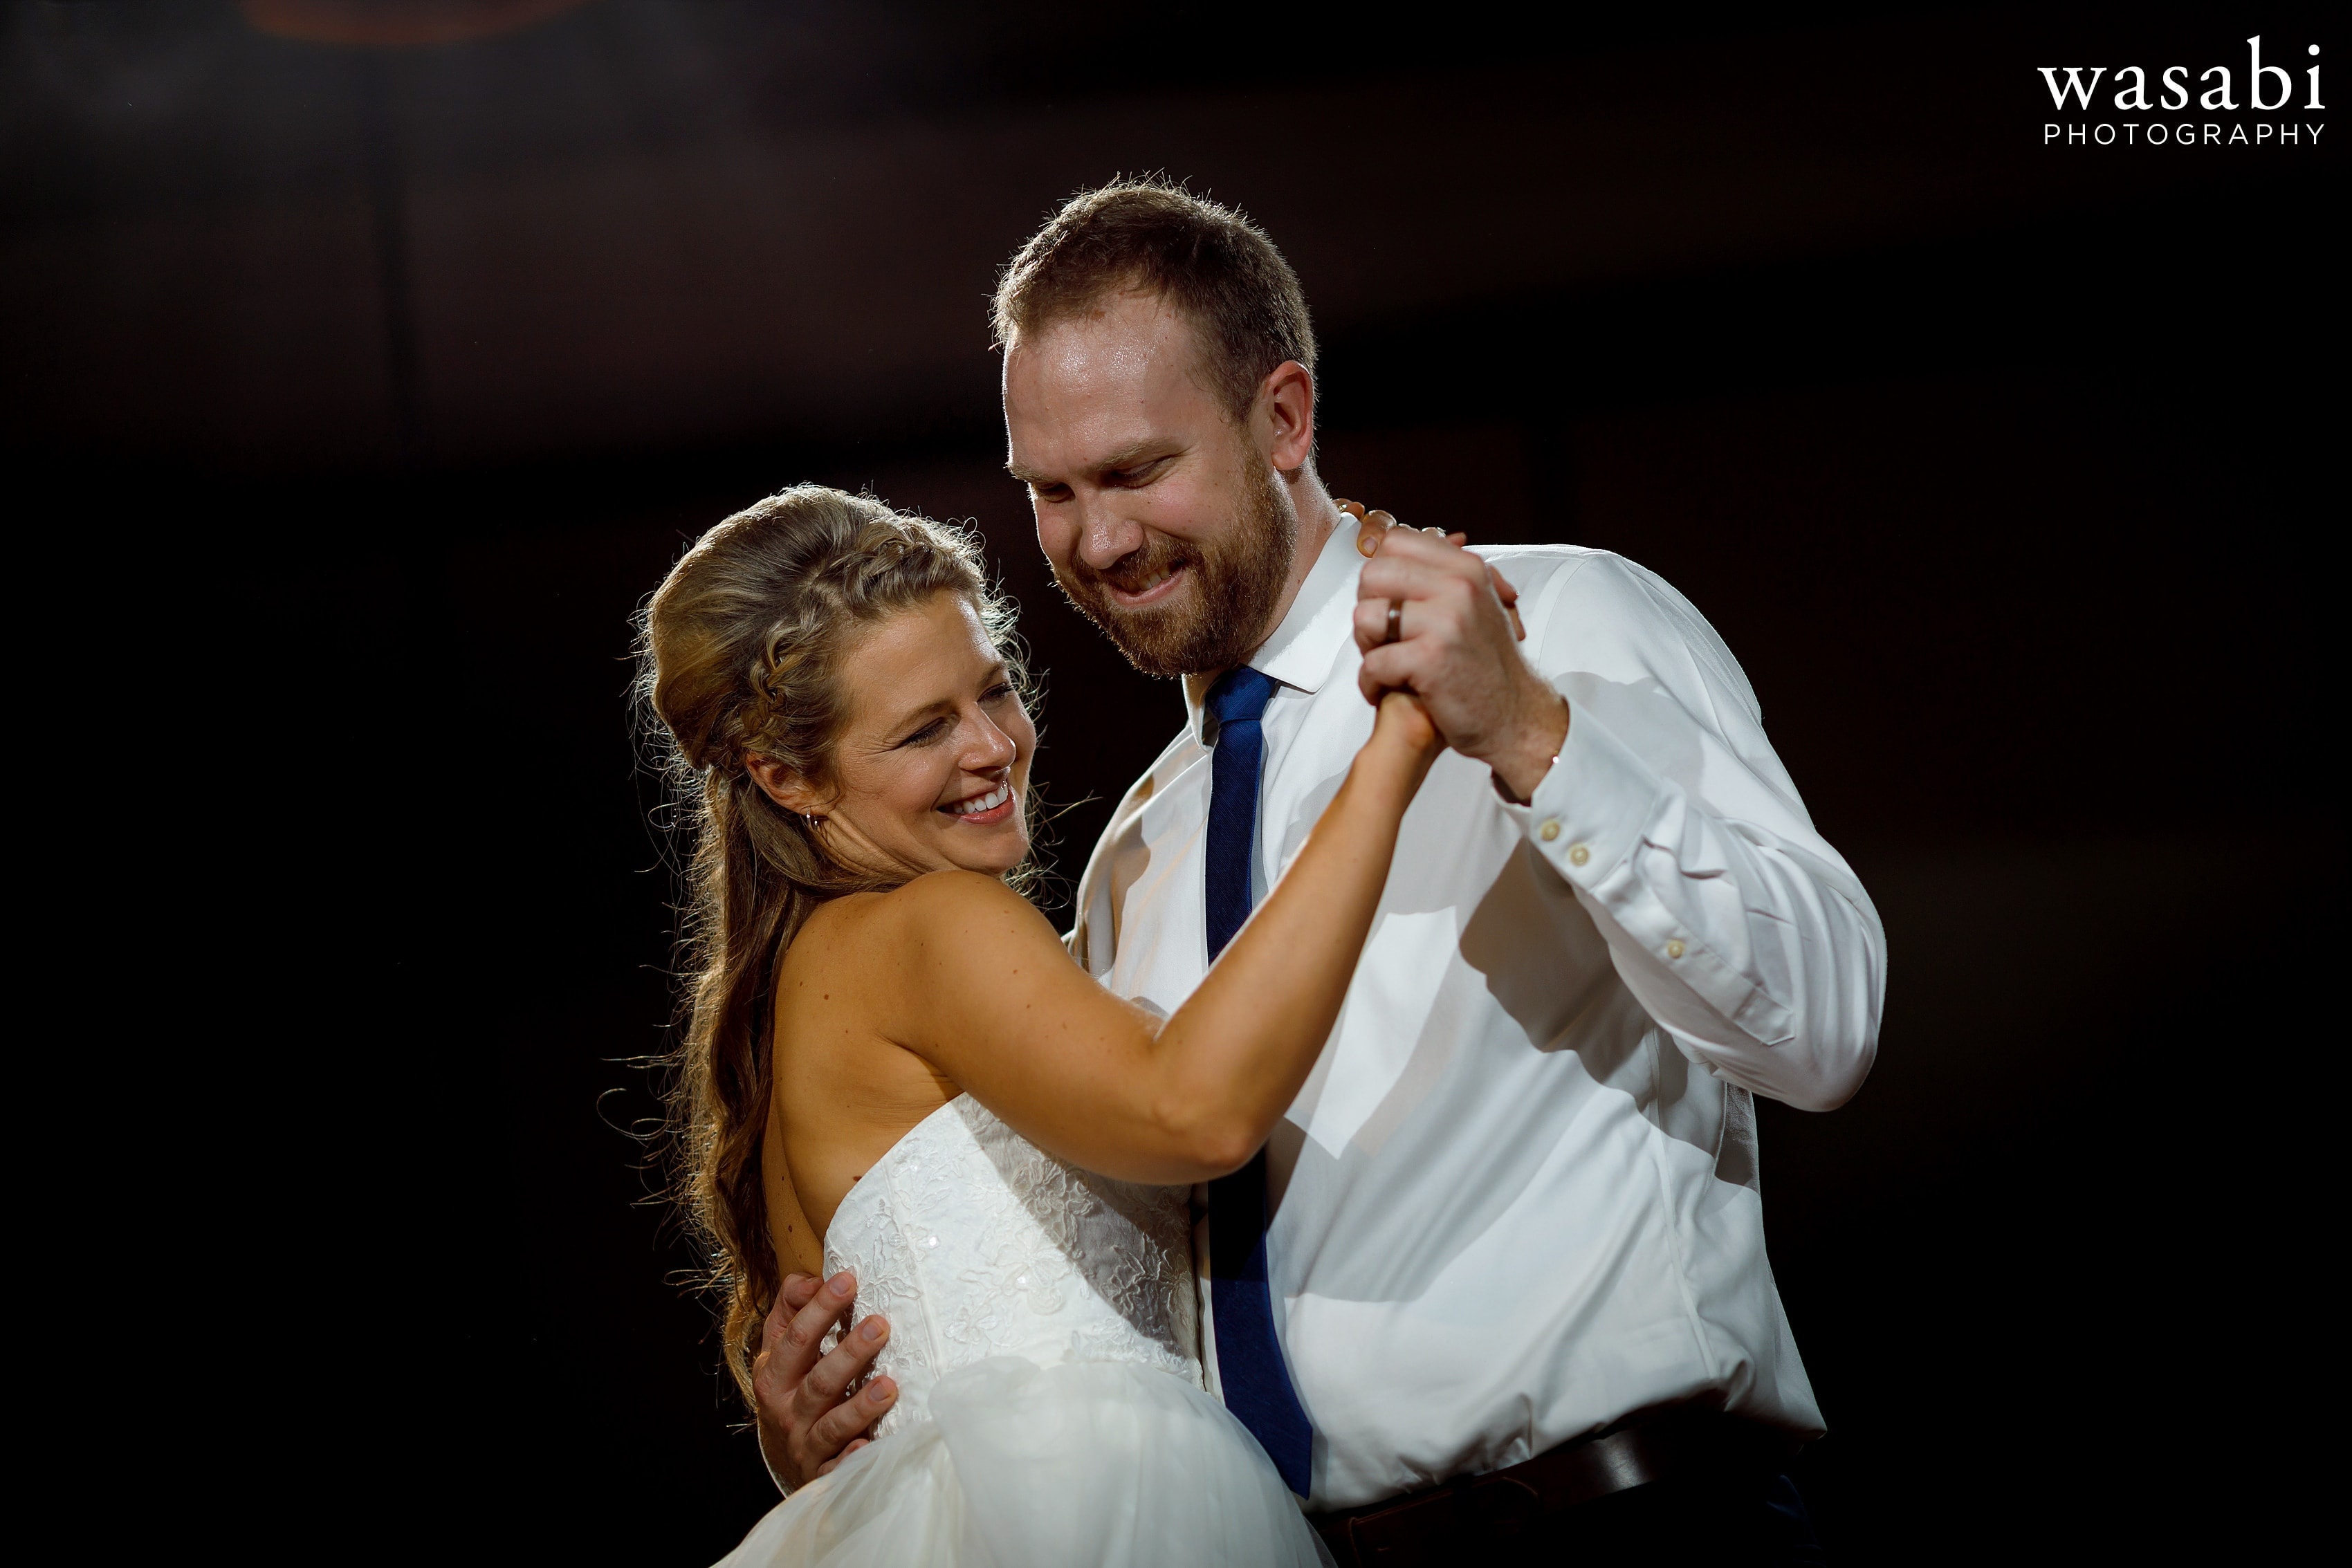 bride and groom share a first dance during a wedding reception at Eberhard Center in downtown Grand Rapids